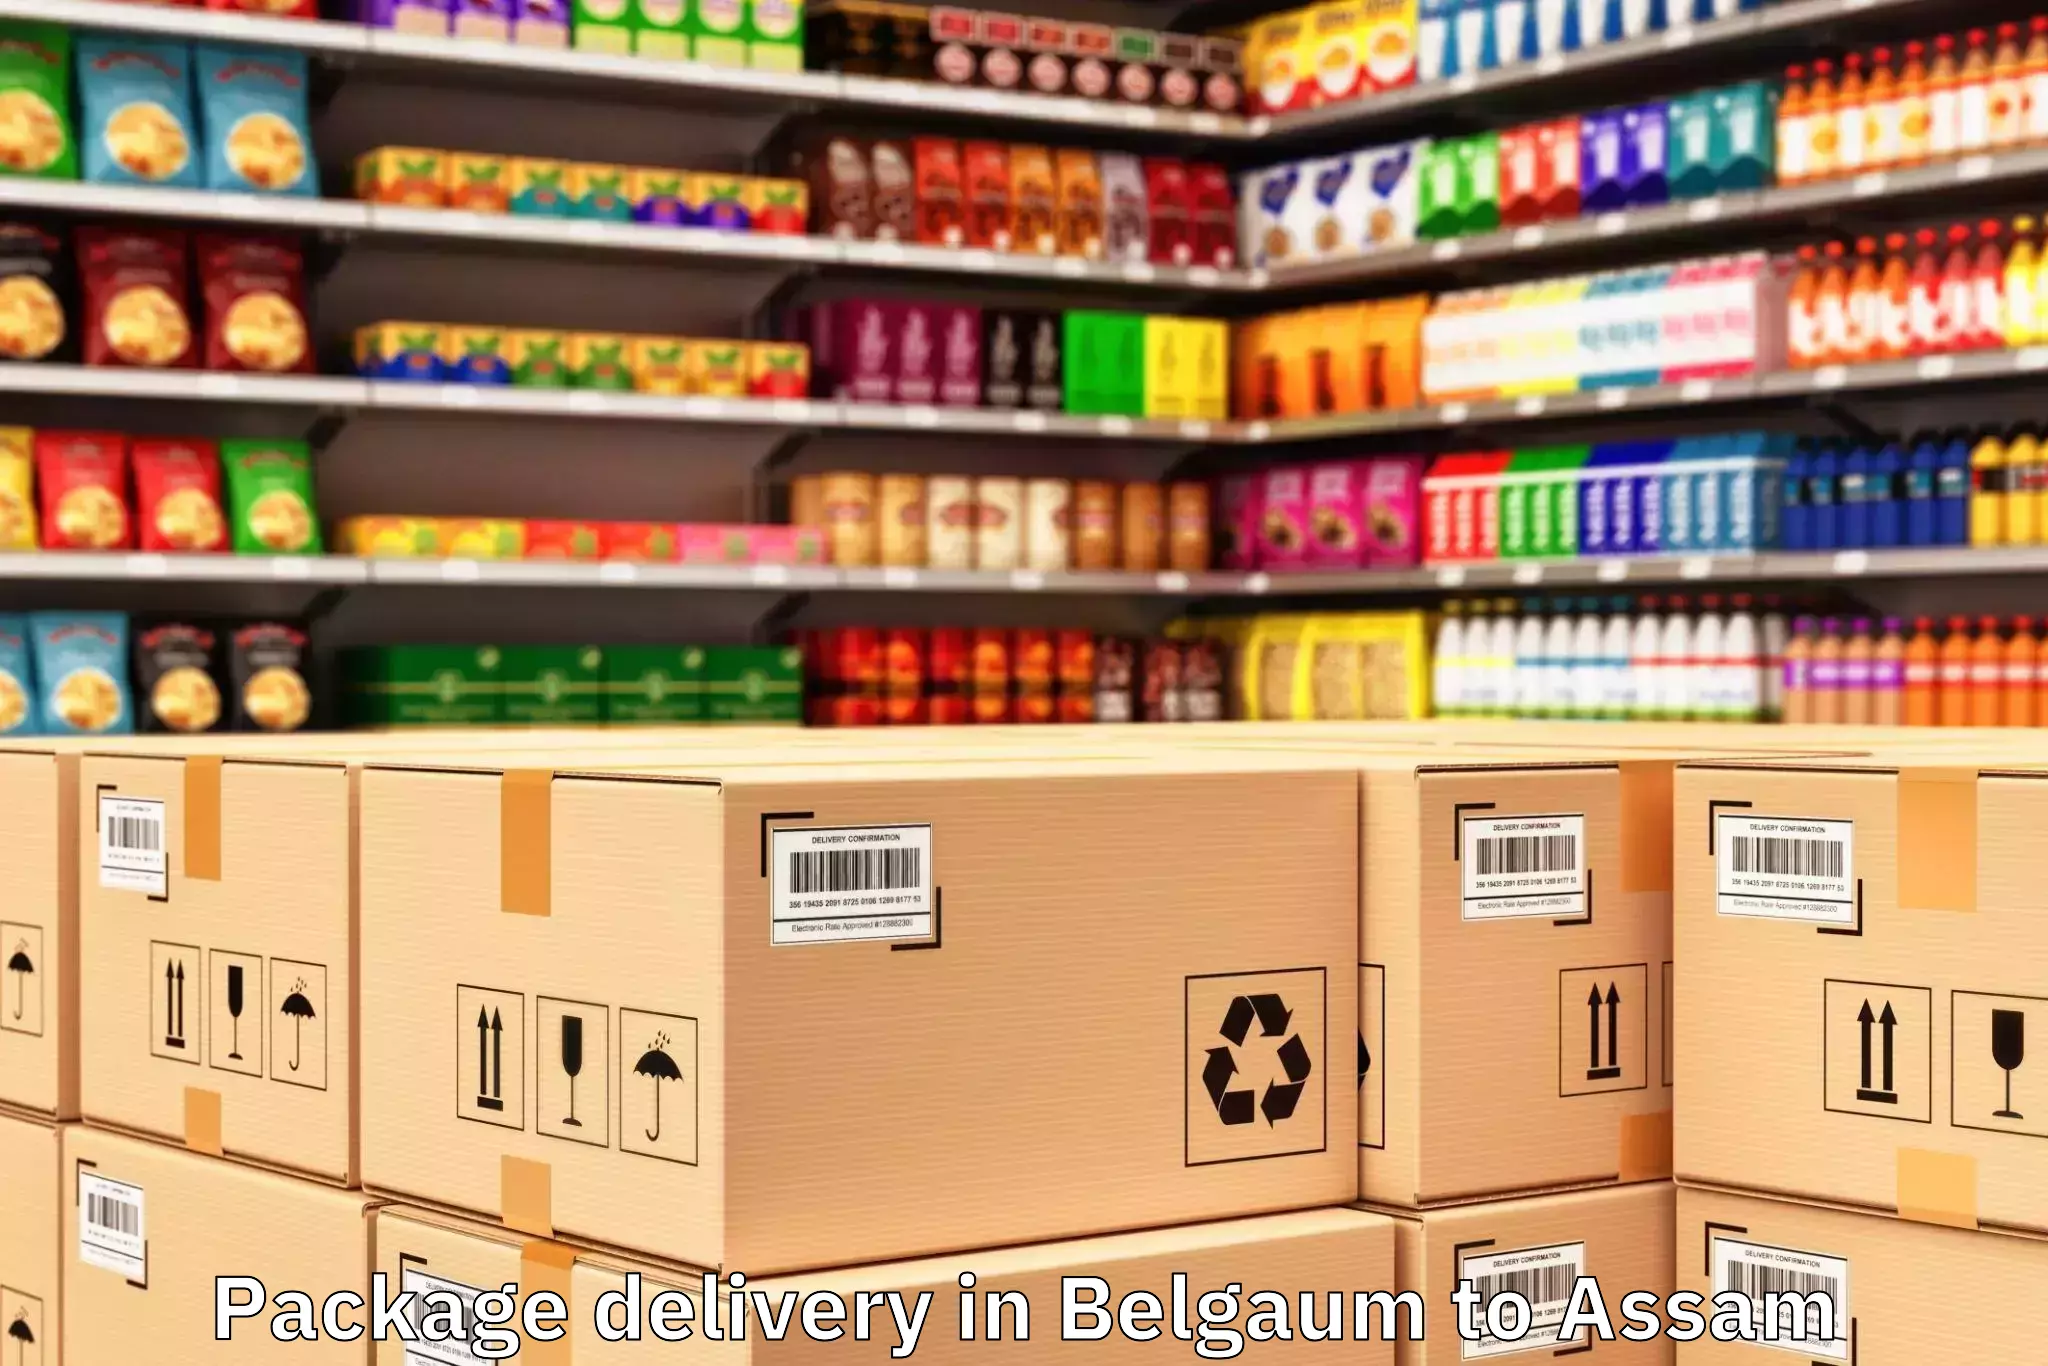 Belgaum to Assam Package Delivery Booking